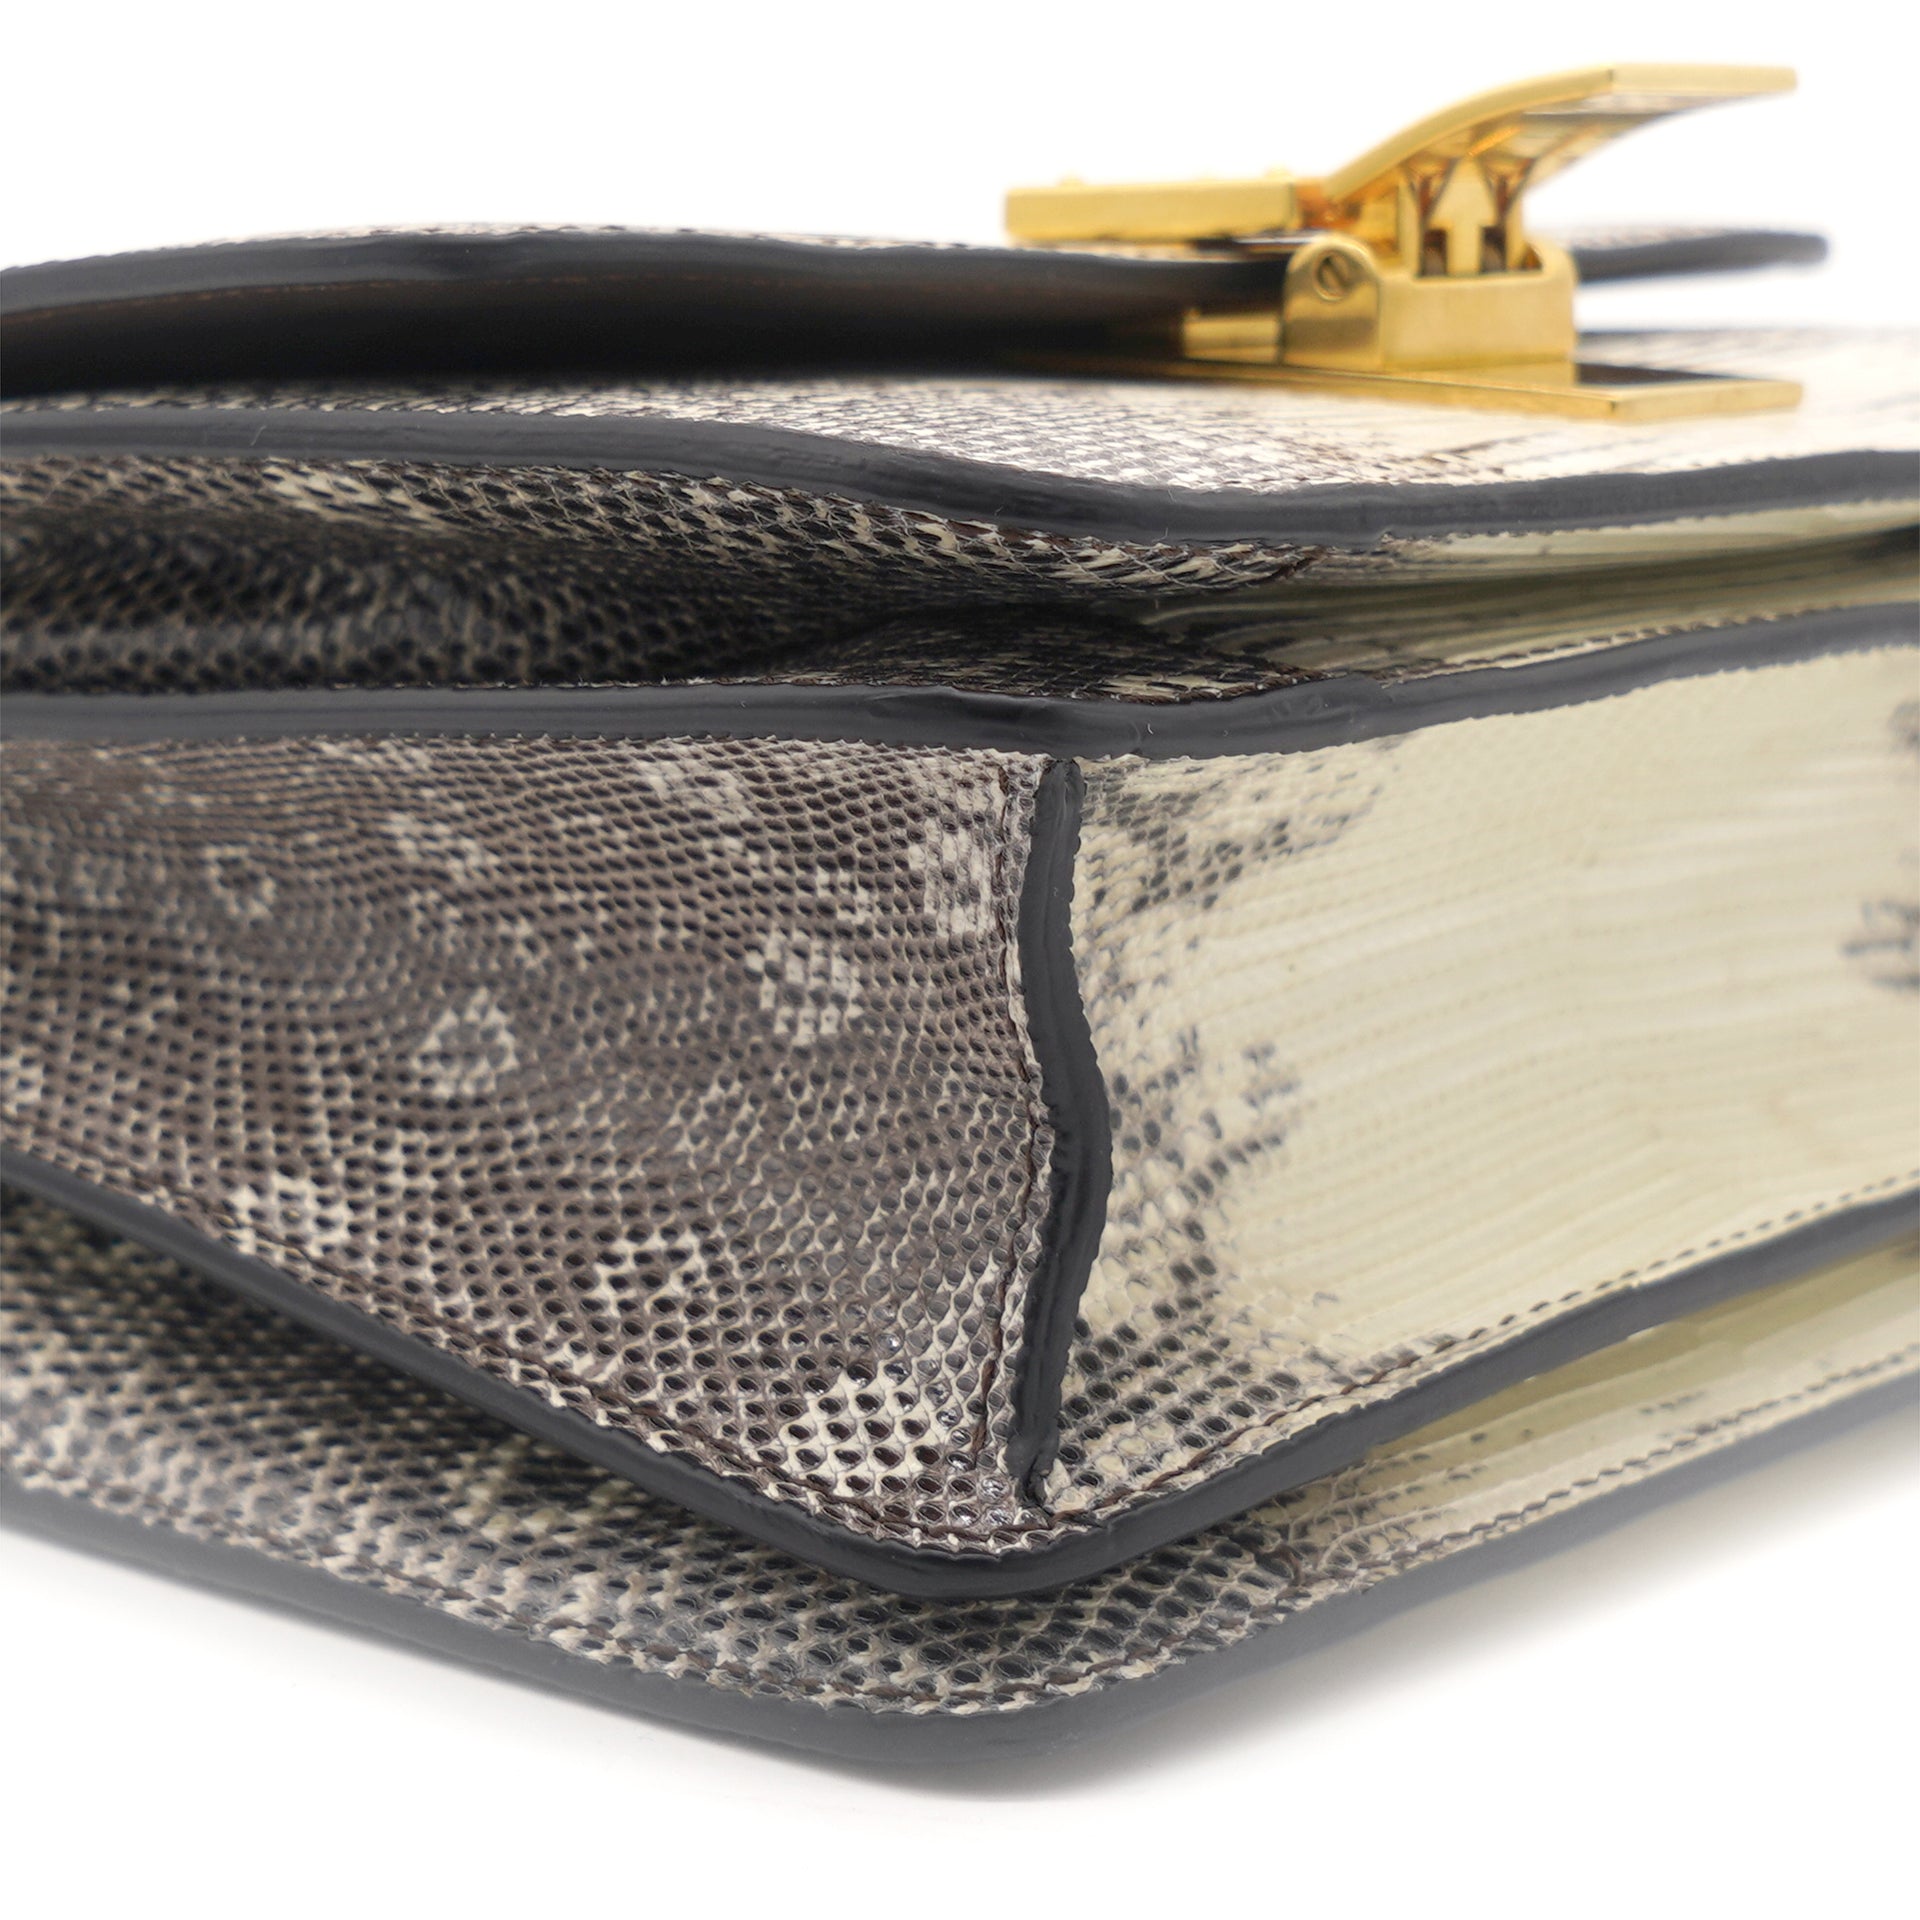 CLUTCH ON CHAIN CUIR TRIOMPHE IN TEXTILE AND CALFSKIN - NATURAL